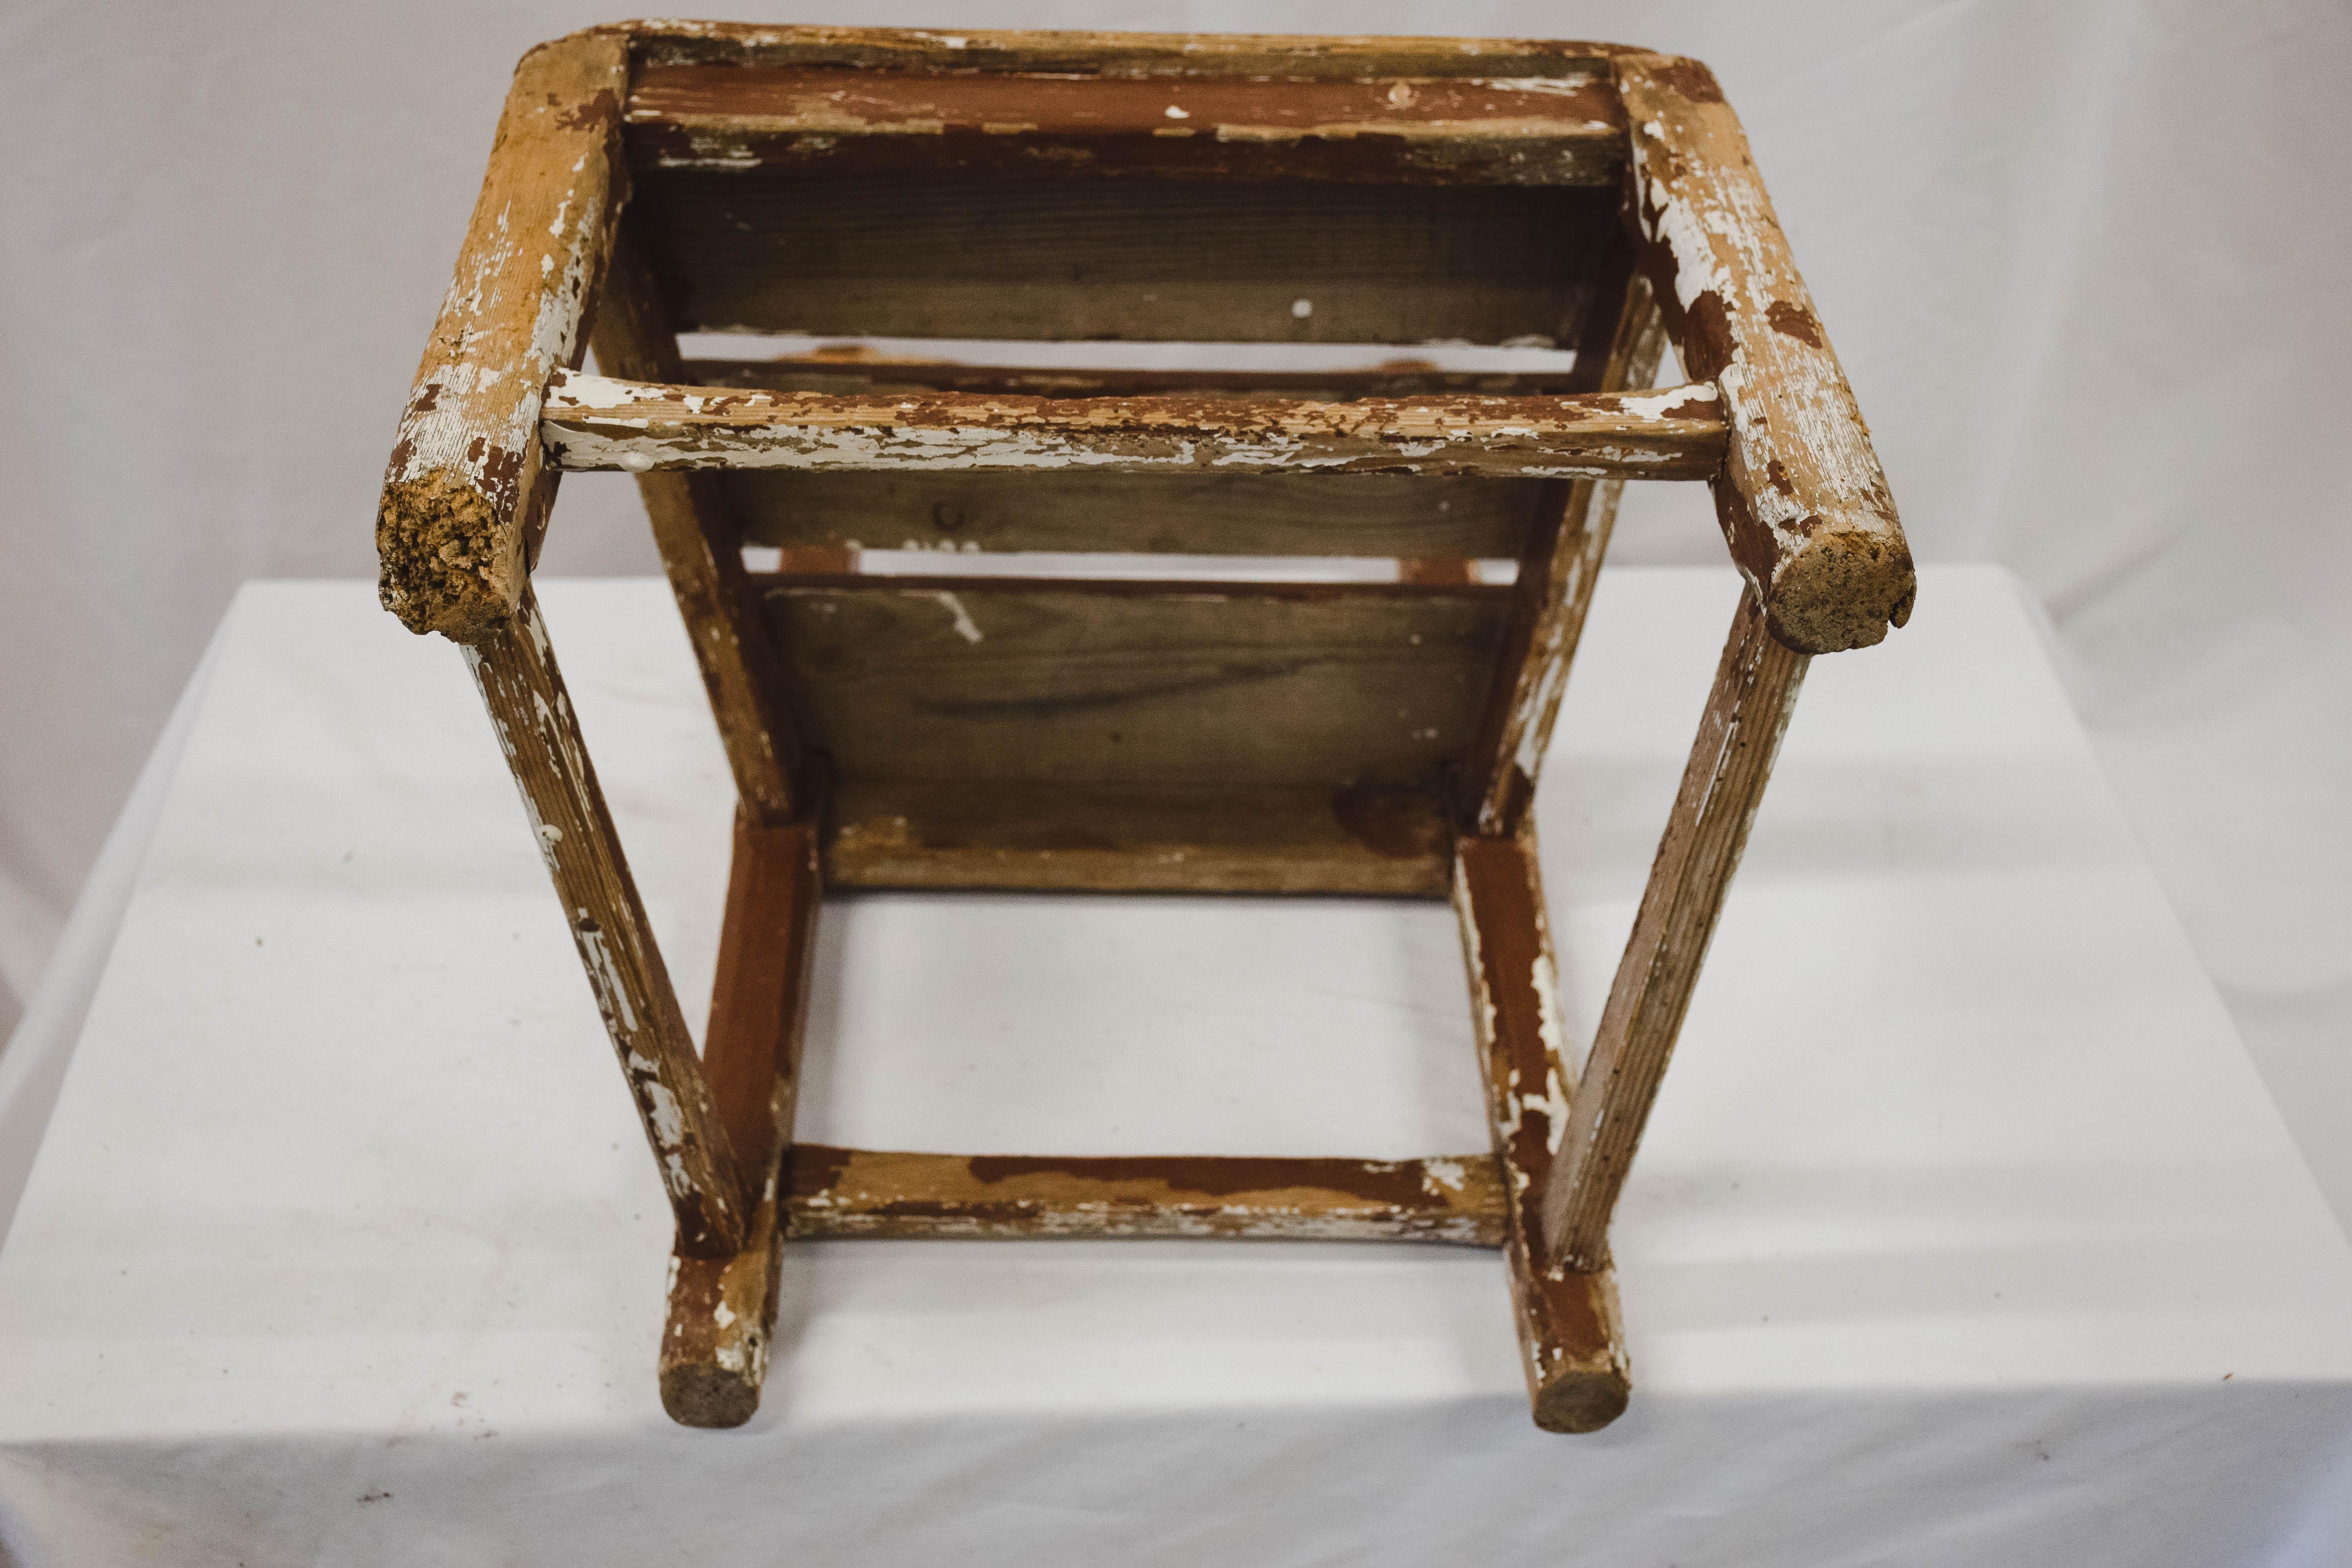 A cute vintage child's chair from France. Handmade from pine with a charming worn patina. Hints of the original white paint remains. This would delight any child wanting his 'own chair' and would be charming just sitting alone beside the hearth.